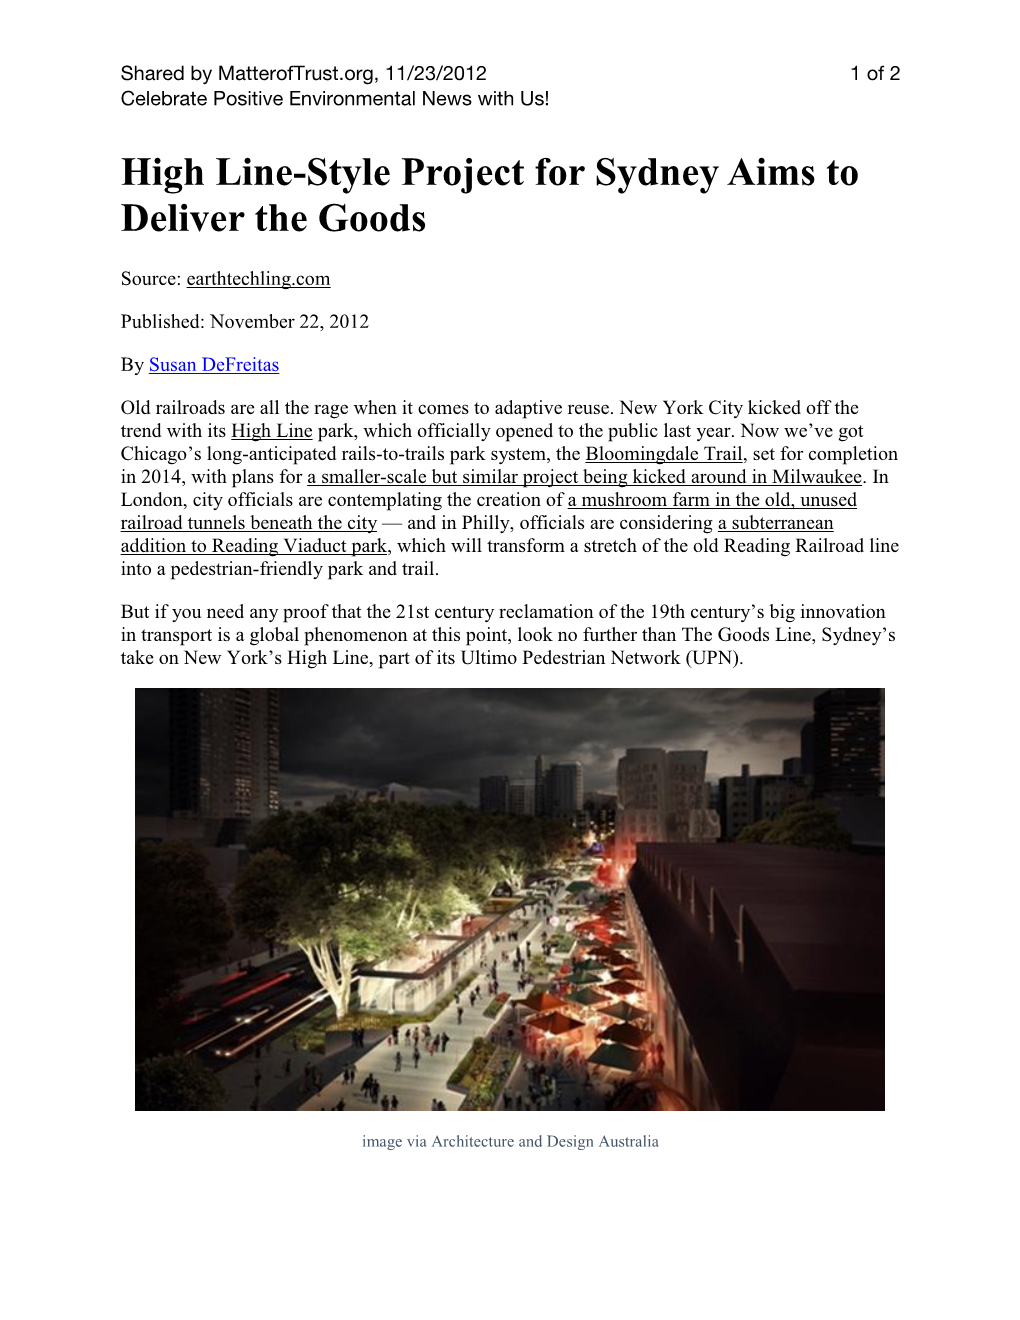 20121123-High-Line-Style-Project-For-Sydney-Aims-To-Deliver-The